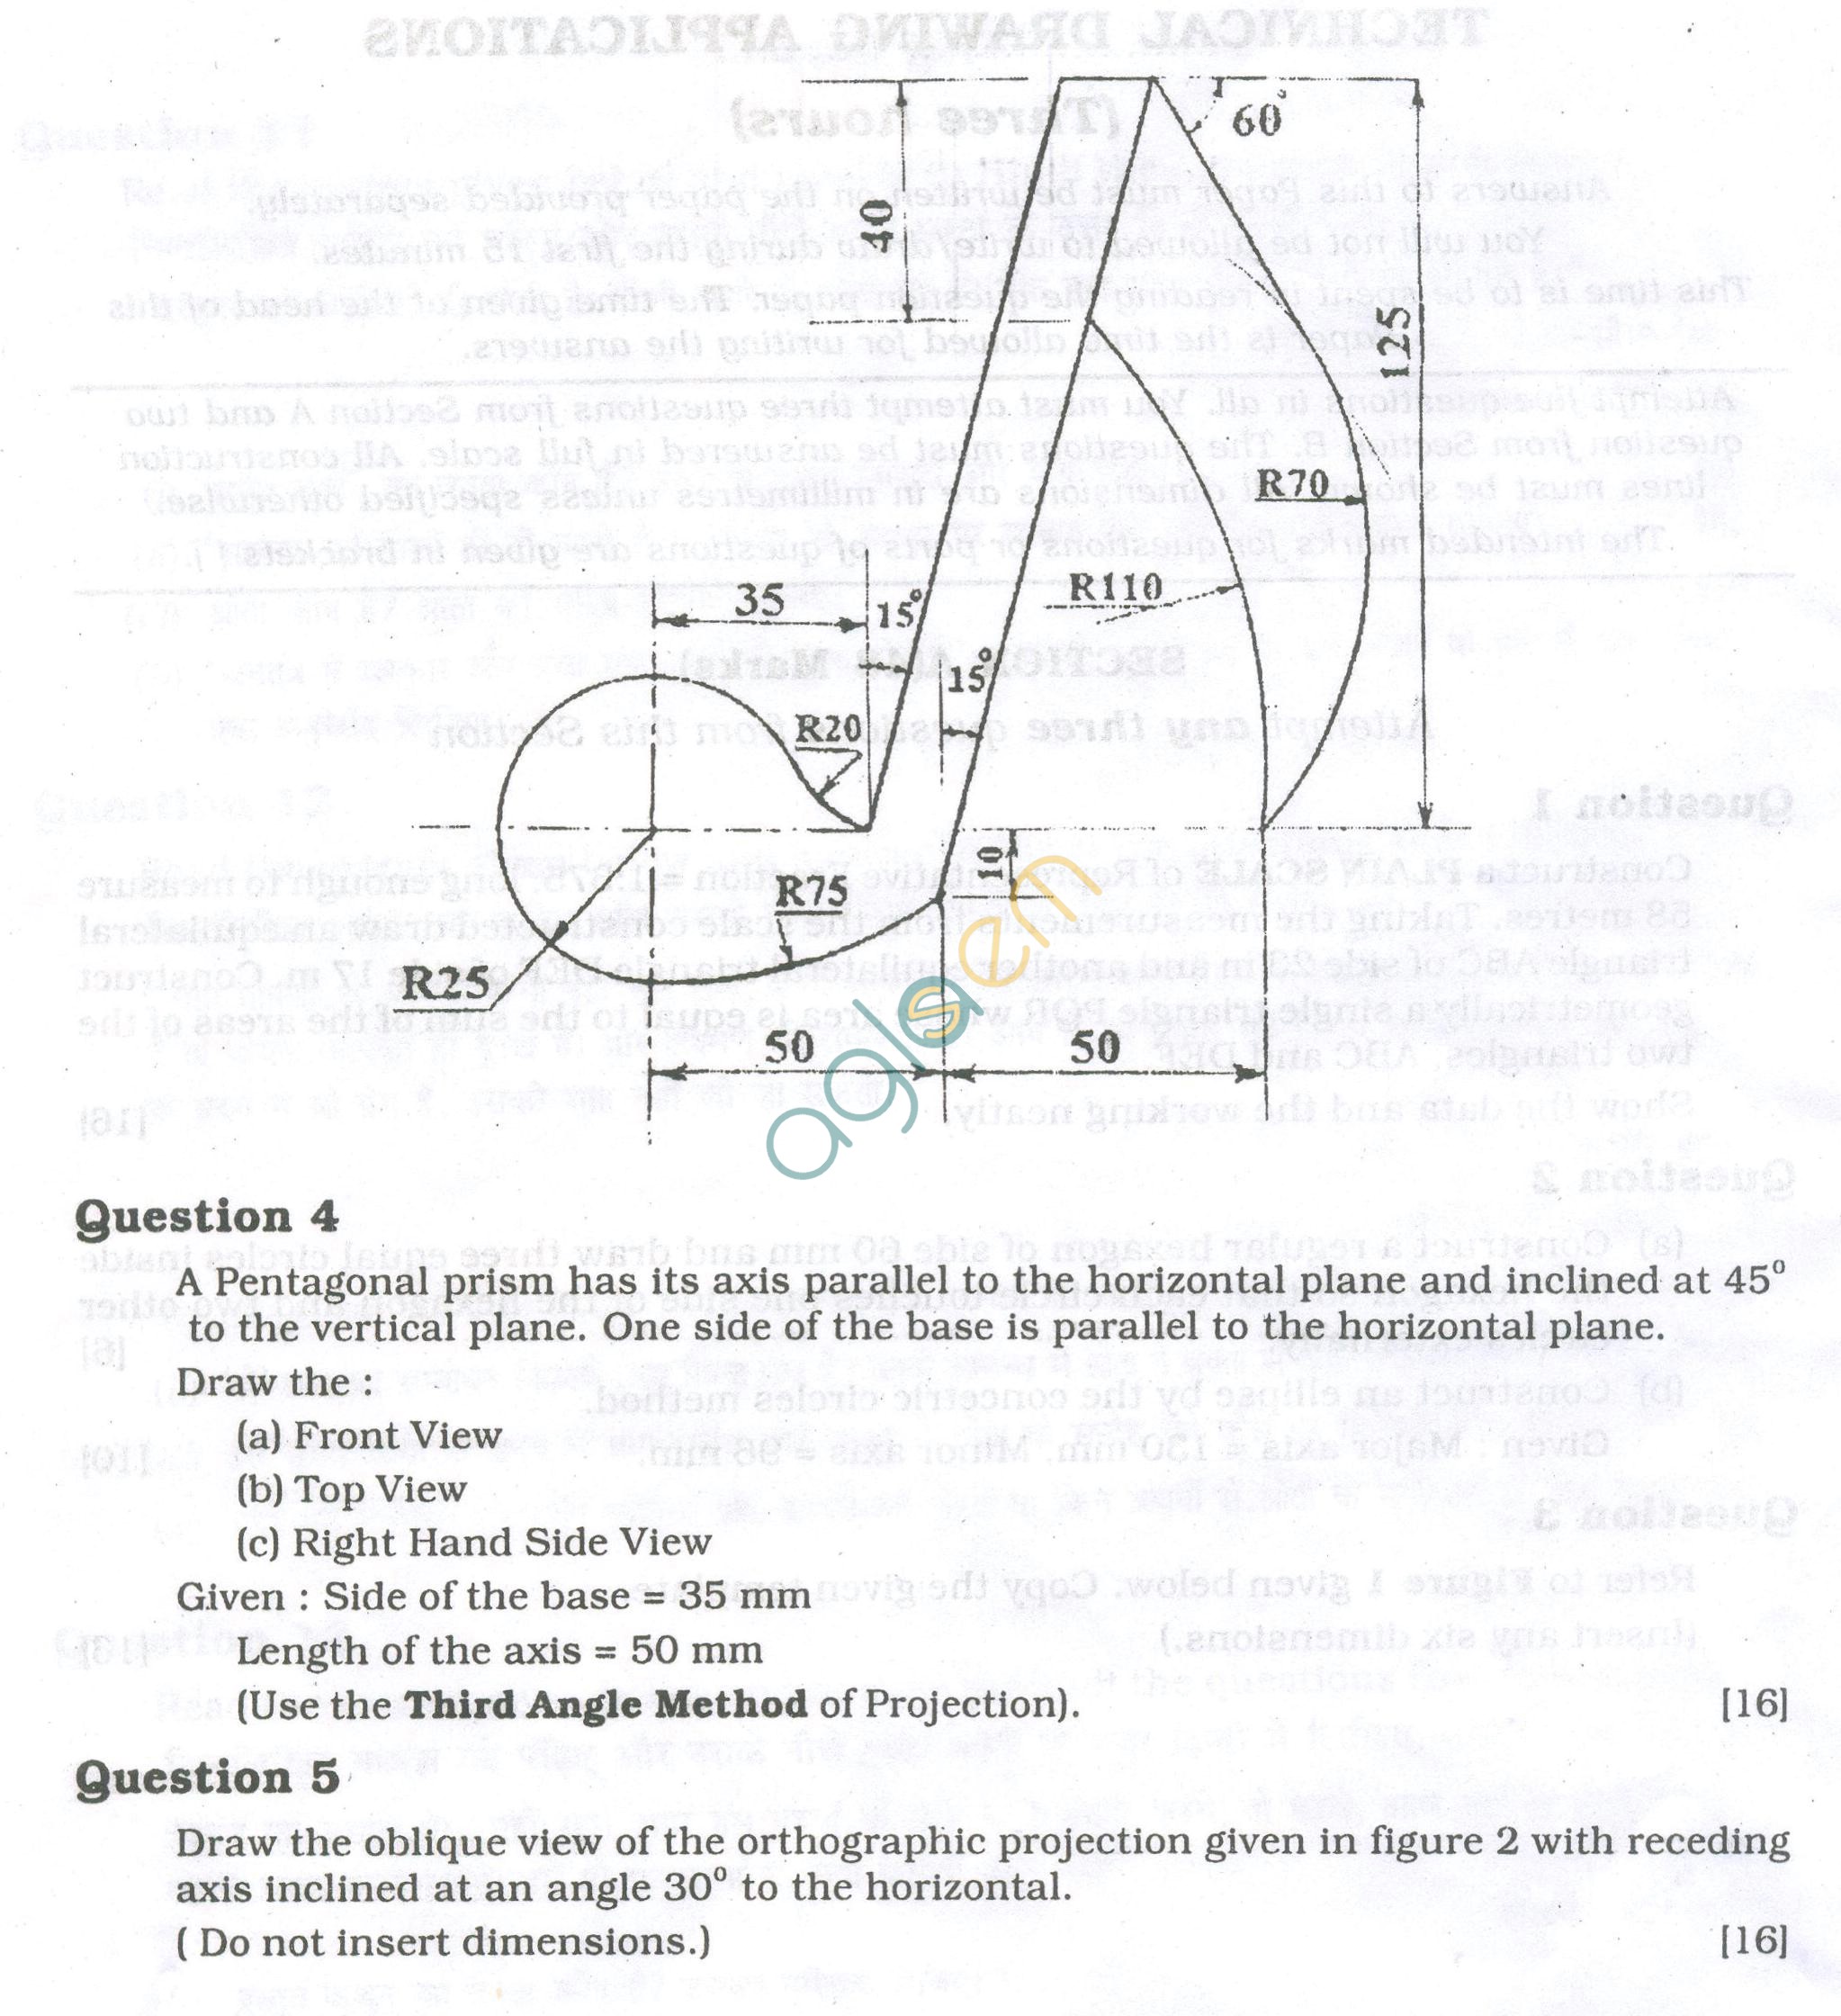 ICSE Question Papers 2013 for Class 10 - Technical Drawing Applications/